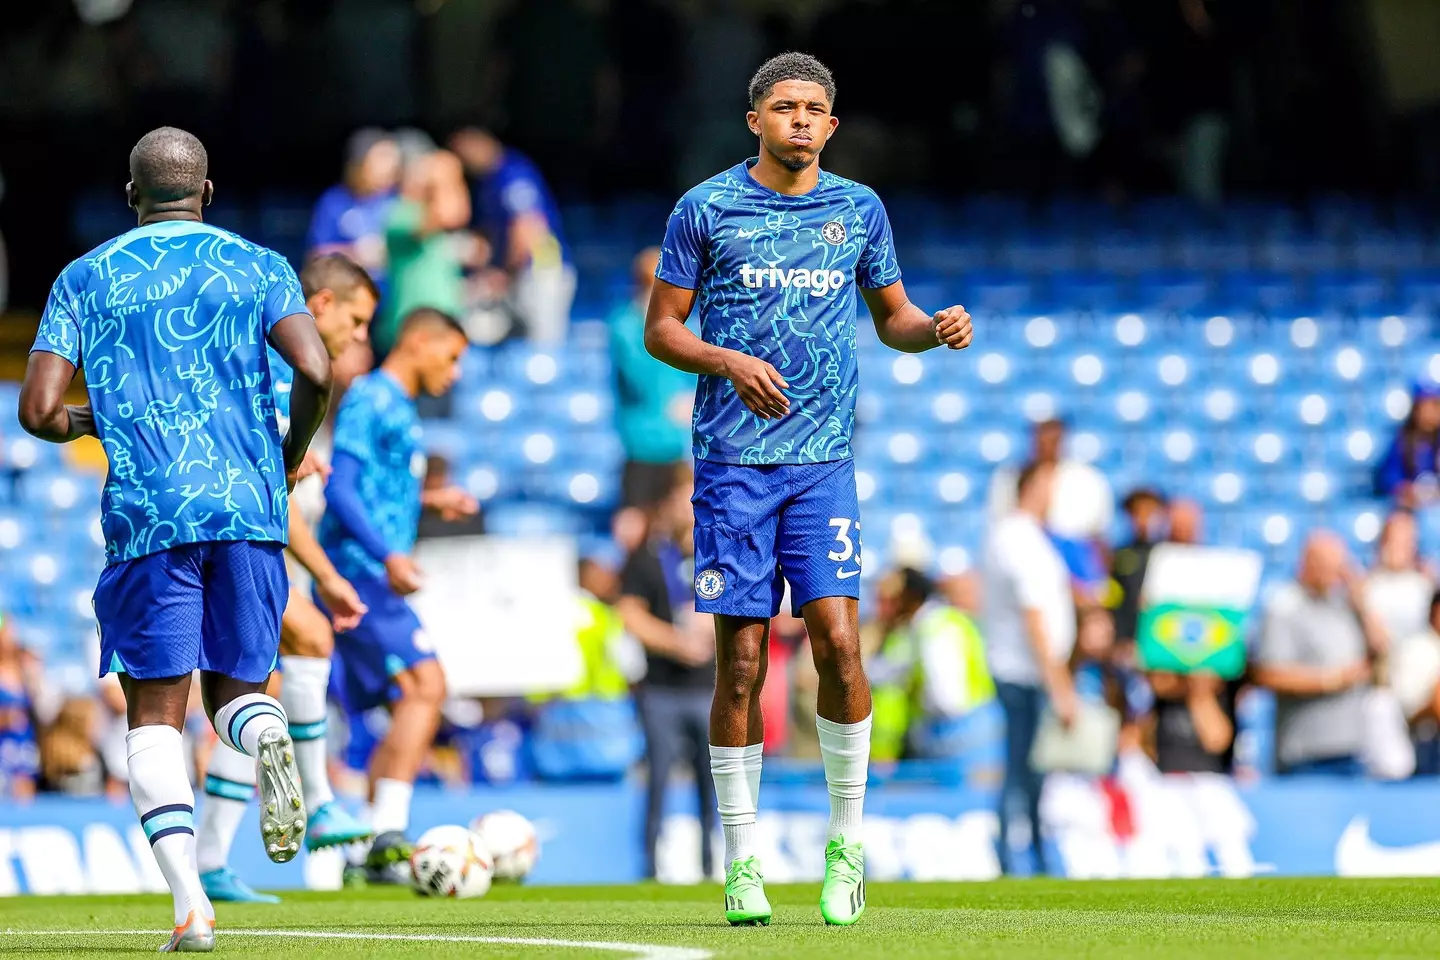 Wesley Fofana (33) of Chelsea during the Premier League match between Chelsea and West Ham United at Stamford Bridge. (Alamy)